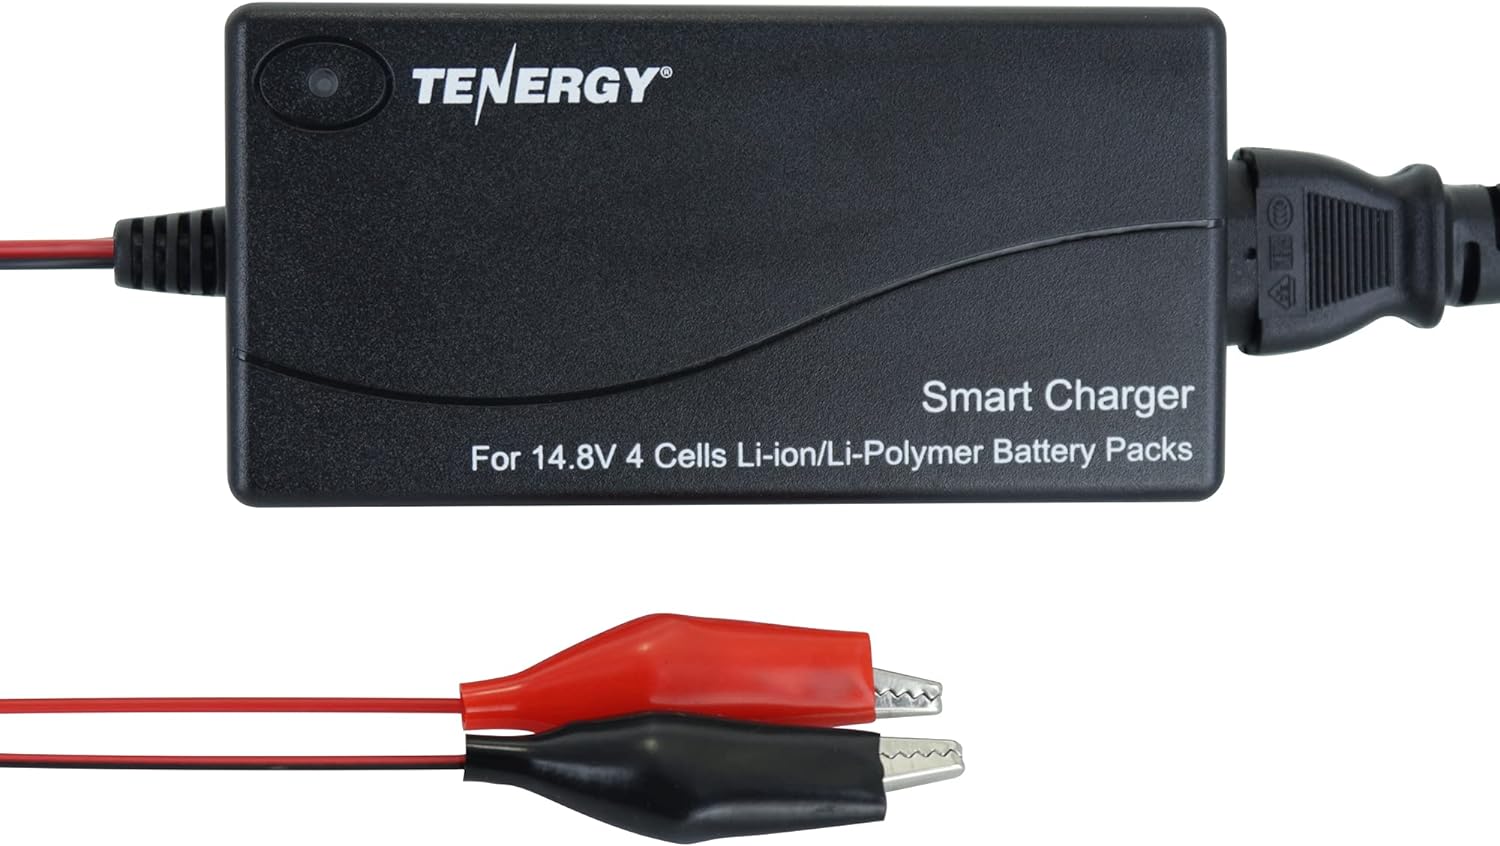 Universal Fast Smart TLP3000 1.5A Charger for Li-Ion/Li-Polymer Battery Pack (14.8V 4 Cells) - UL Approved Color Red, B - Click Image to Close